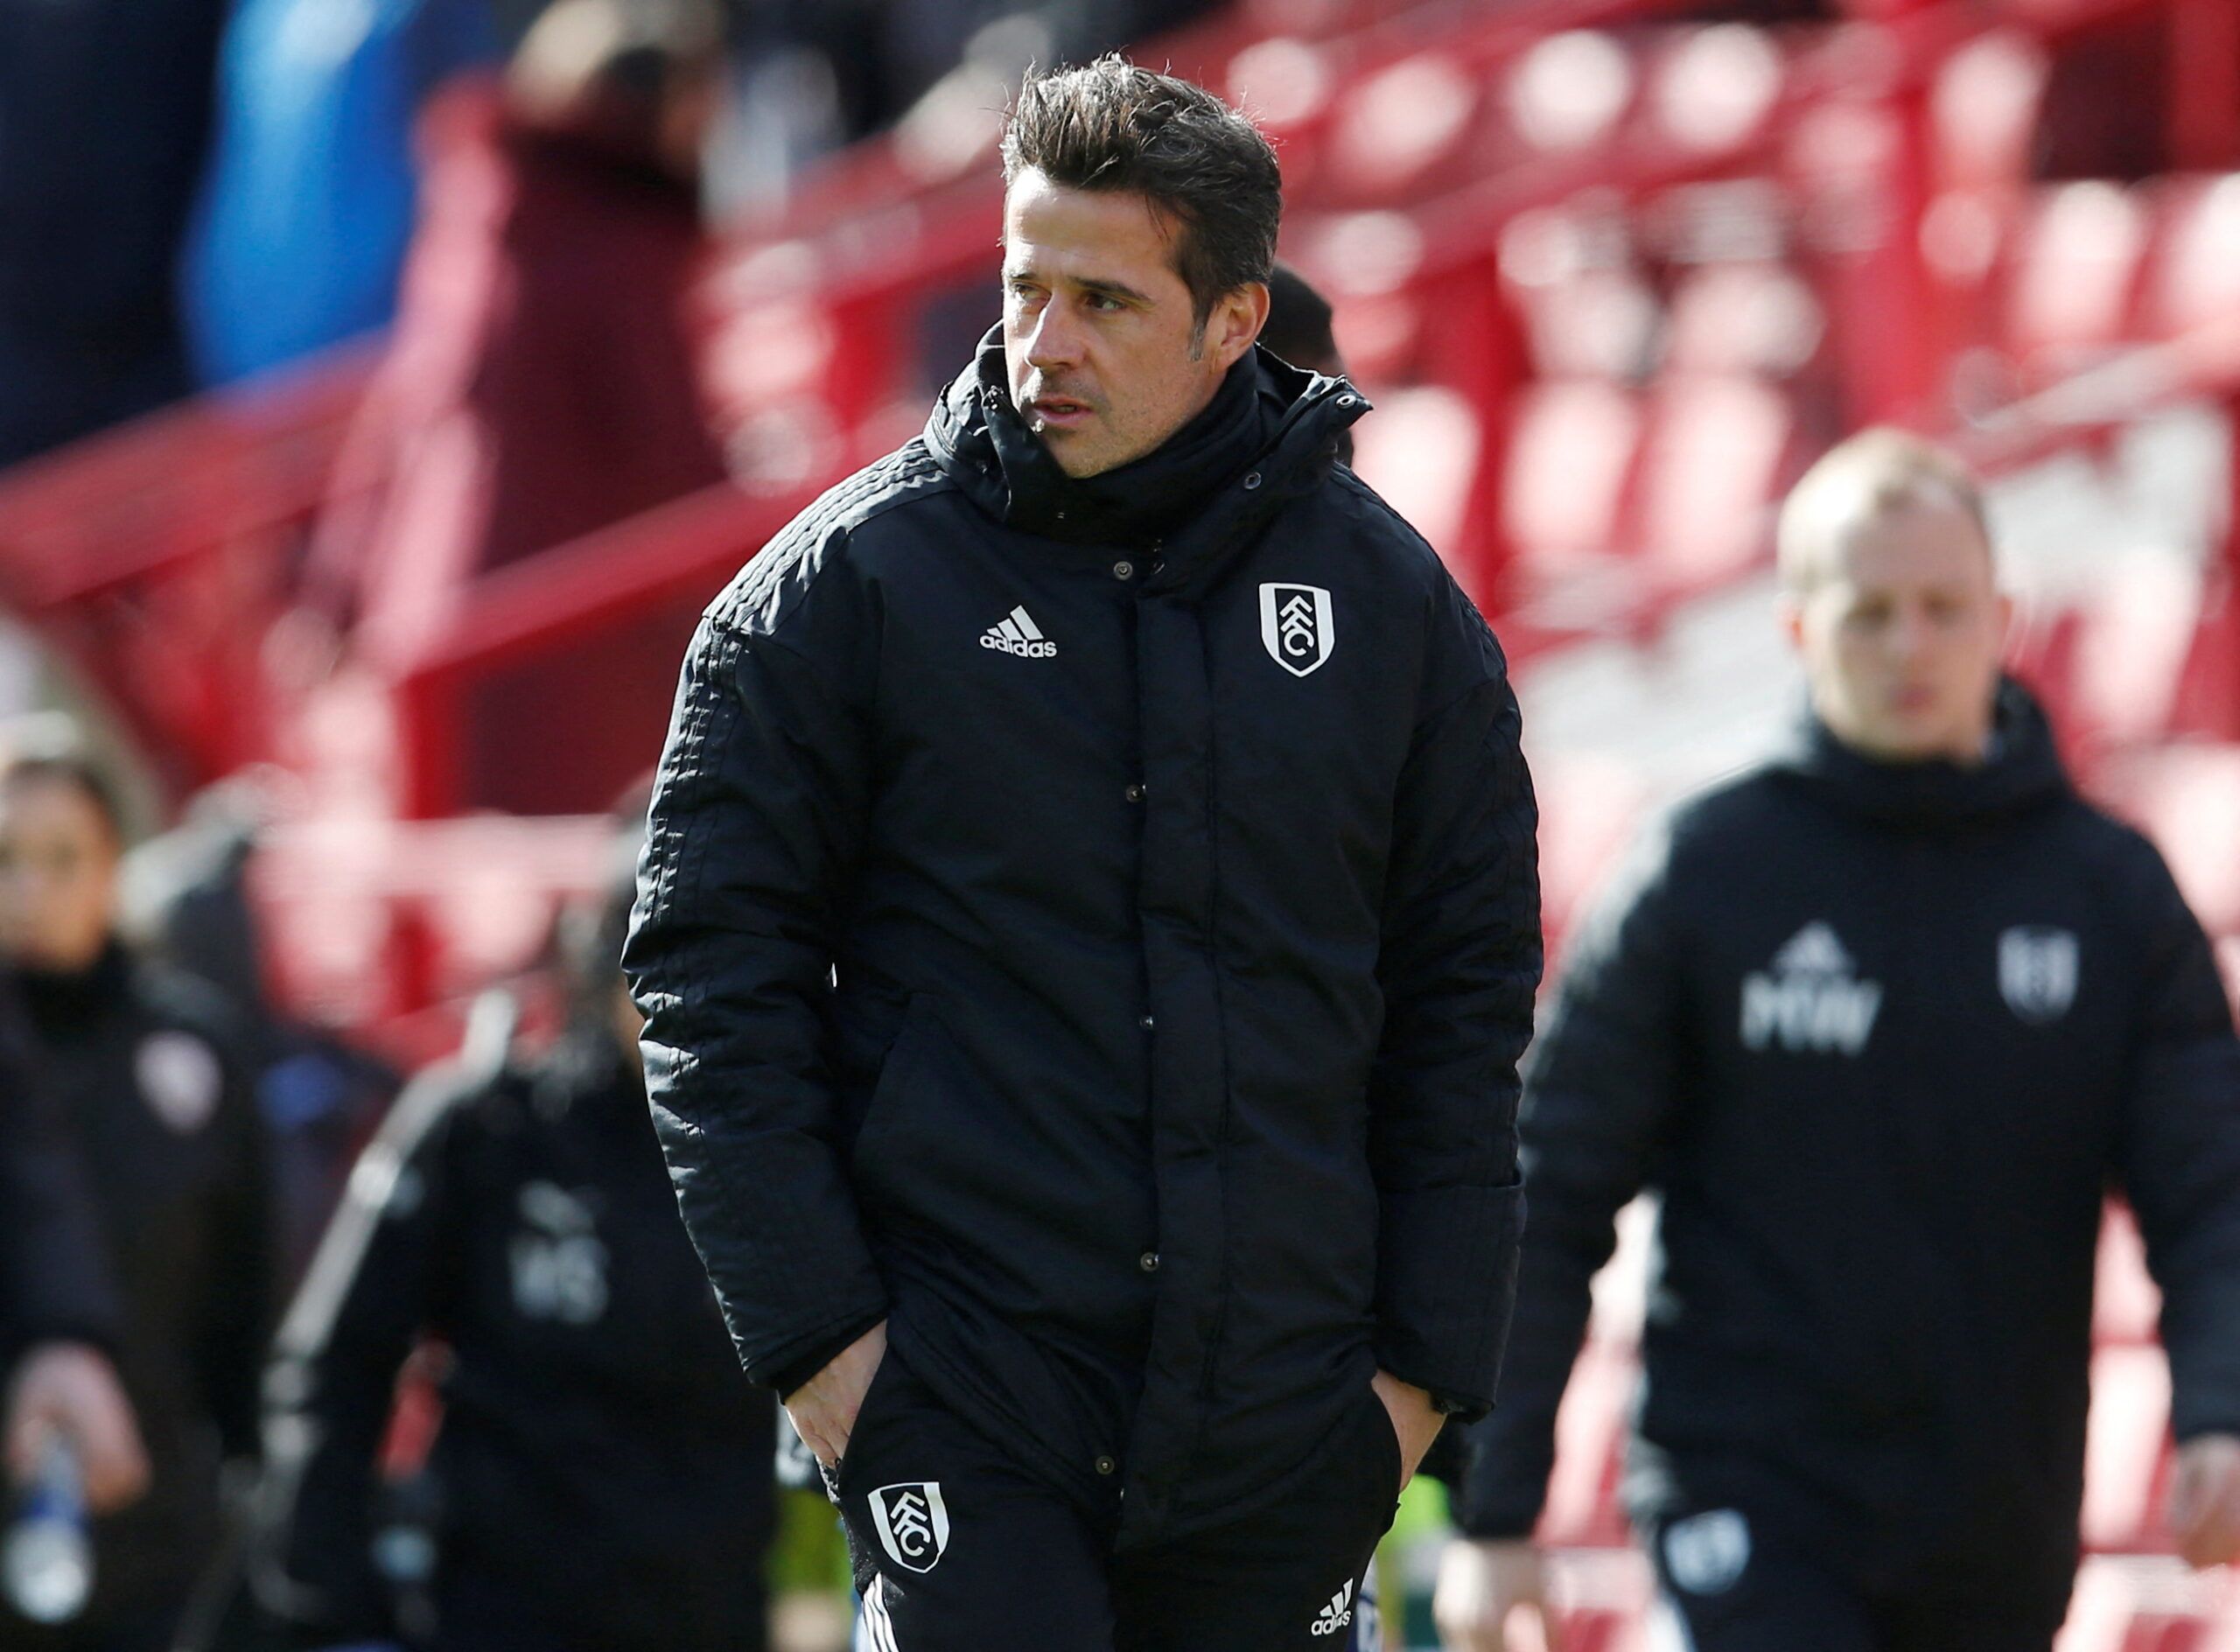 Soccer Football - Championship - Barnsley v Fulham - Oakwell, Barnsley, Britain - March 12, 2022   Fulham manager Marco Silva leaves the pitch at half time  Action Images/Ed Sykes  EDITORIAL USE ONLY. No use with unauthorized audio, video, data, fixture lists, club/league logos or 